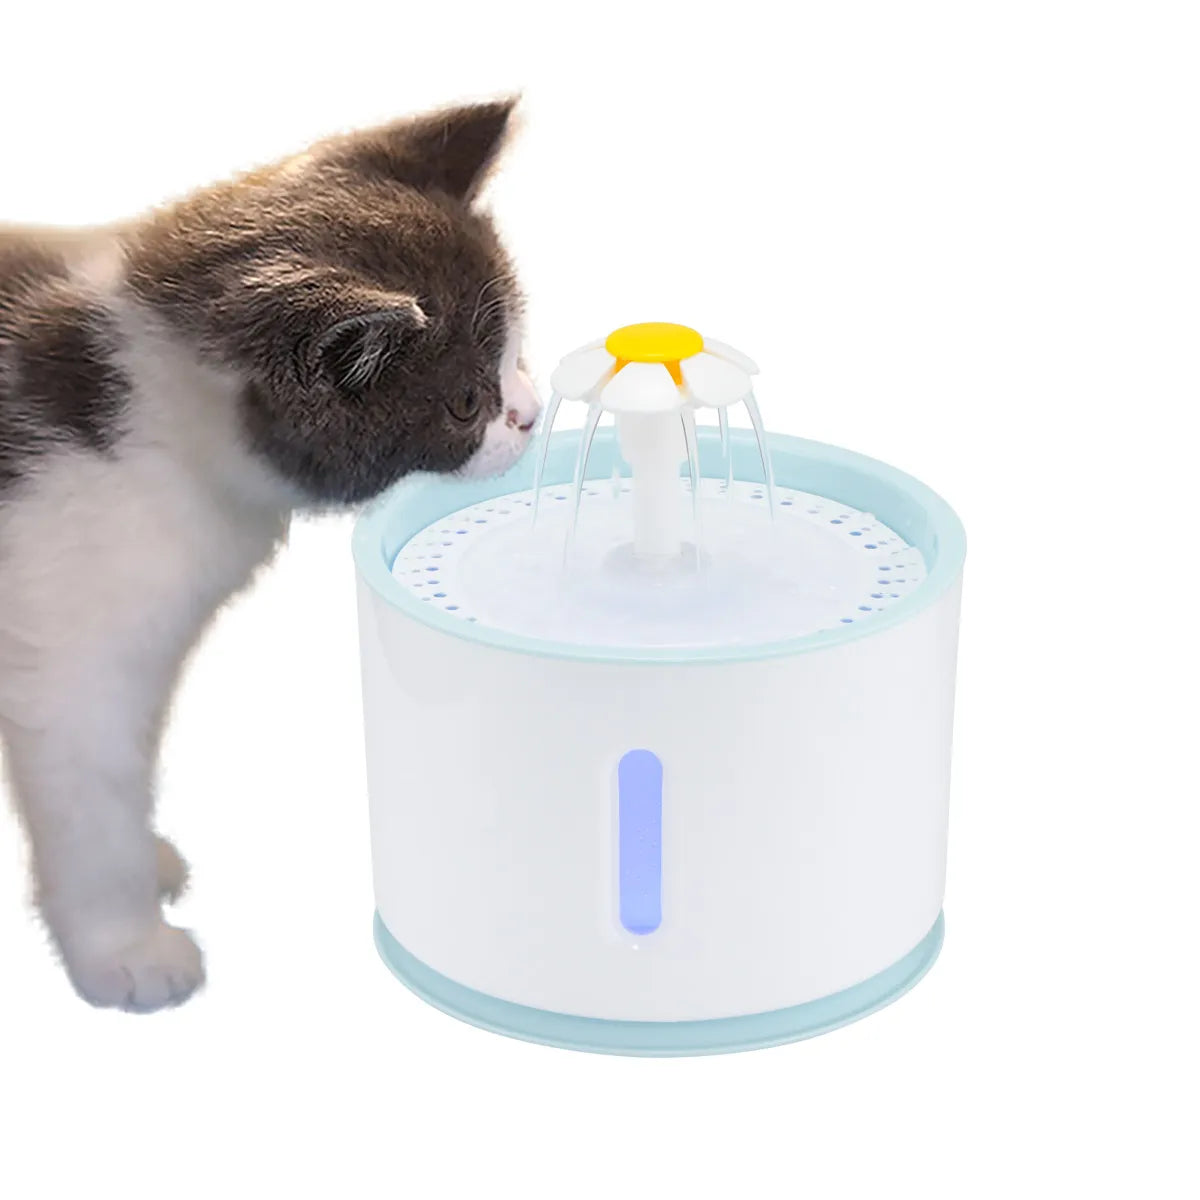 "2.4L Automatic Pet Cat Water Fountain with LED: Electric USB Dog Cat Pet Mute Drinker Feeder Bowl, Pet Drinking Fountain Dispenser"